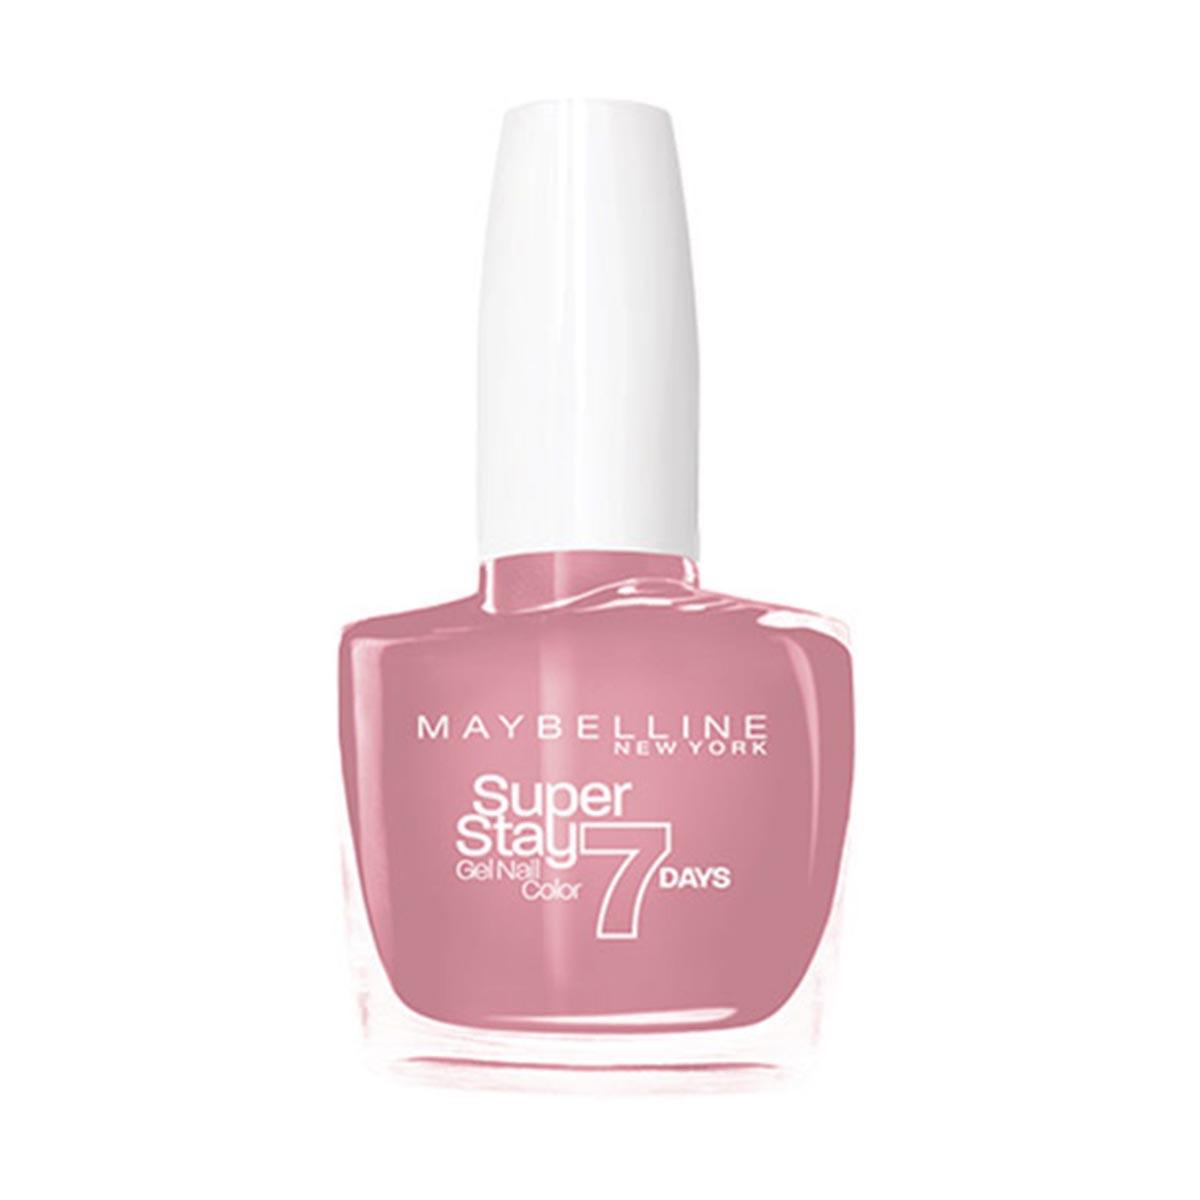 maybelline-superstay-gel-nail-color-7-days-135-nude-rose